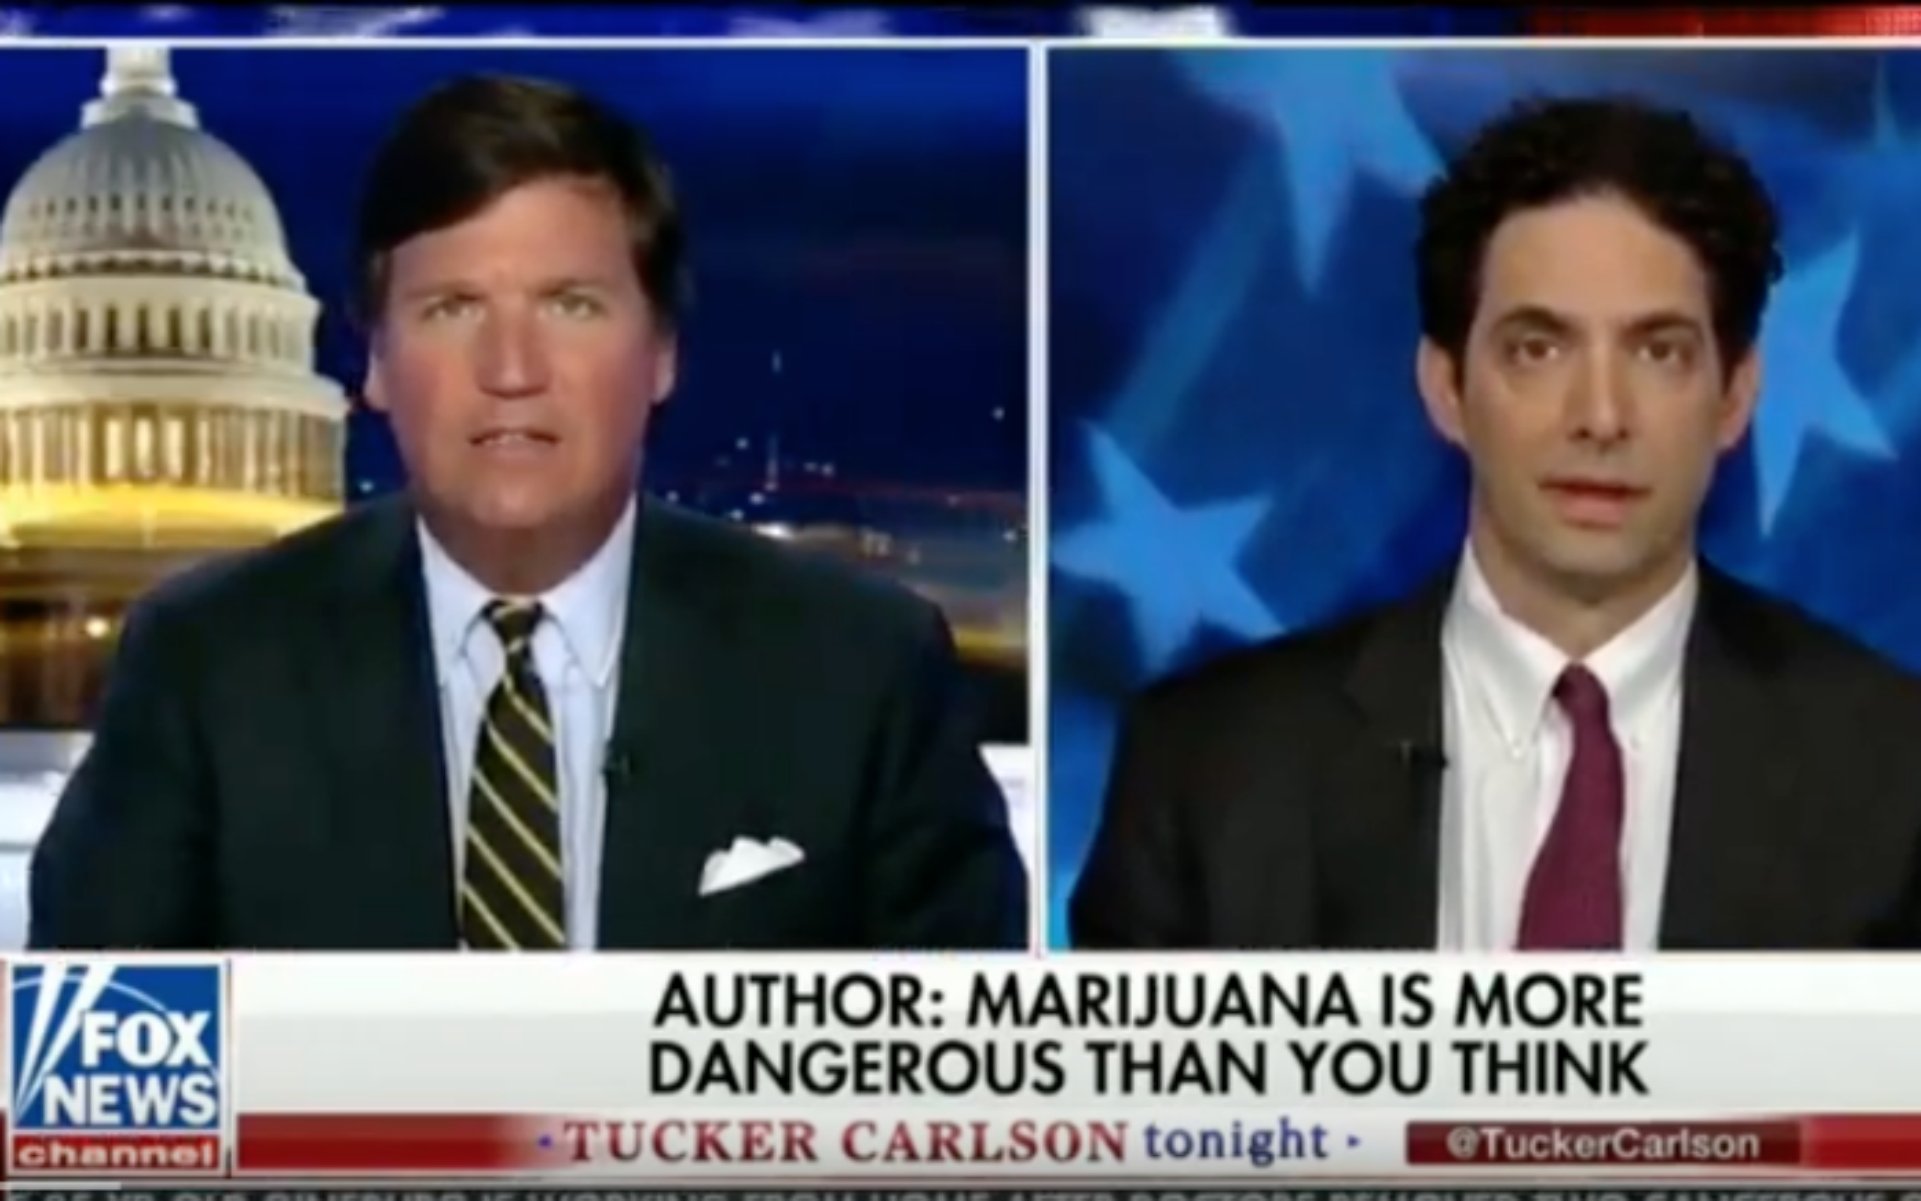 In case you’ve seen that hit piece on cannabis—“Tell Your Children the Truth About Marijuana,” aka Reefer Madness Returns—here’s a great rebuttal and a compelling takedown.